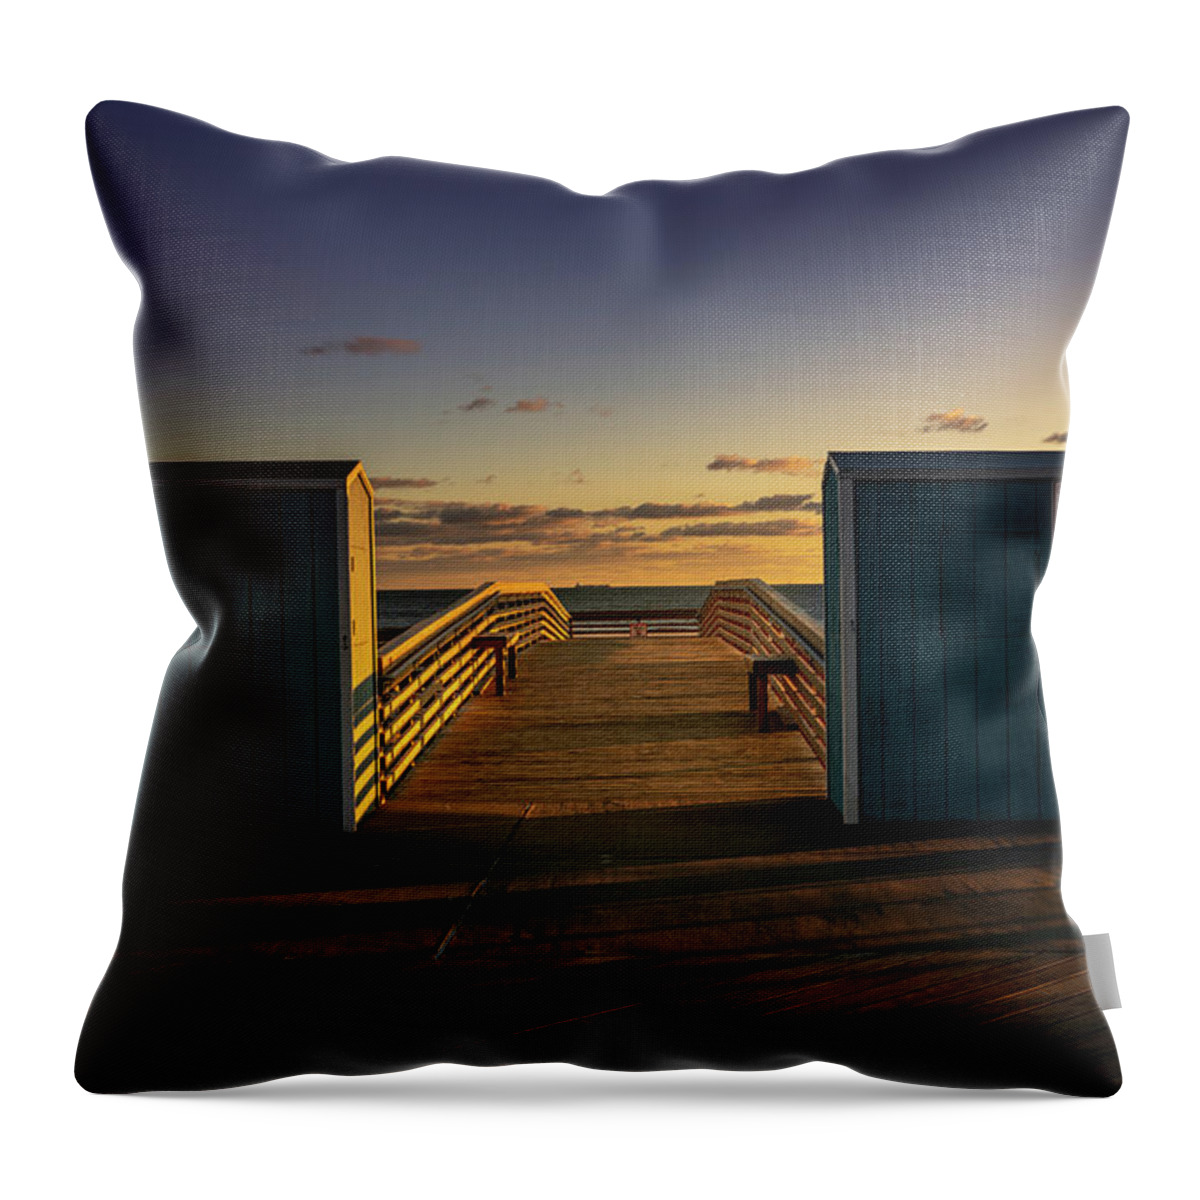 New York Throw Pillow featuring the photograph The Remain of Summer by Nick McGuire